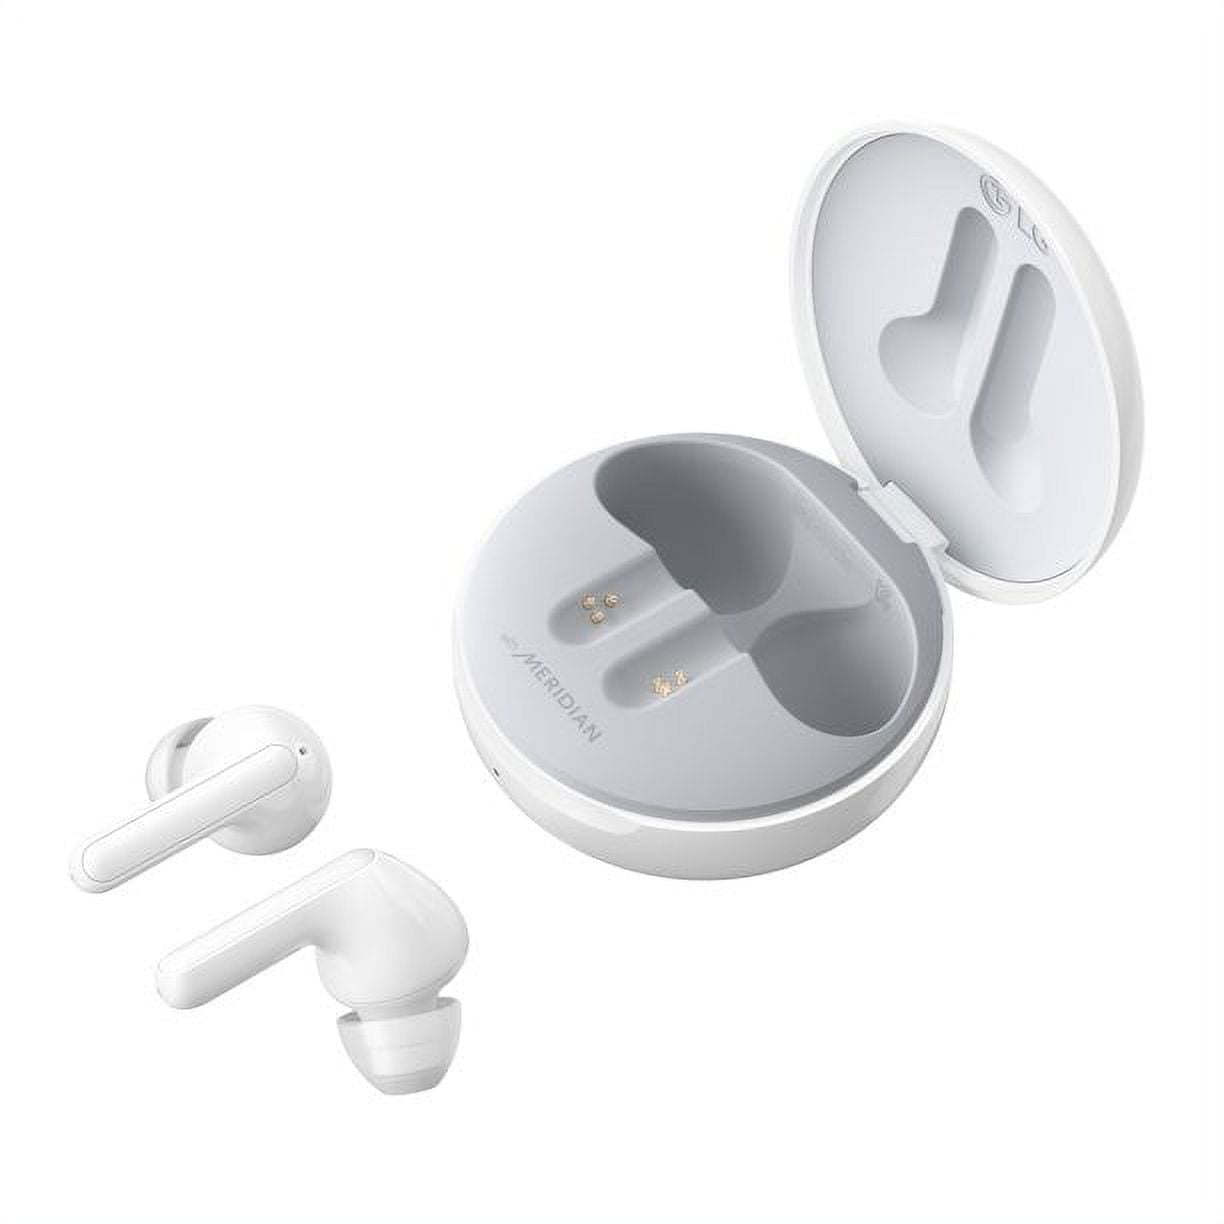 Noise Active Free White FN7 Earbuds, Tone LG Cancellation Bluetooth